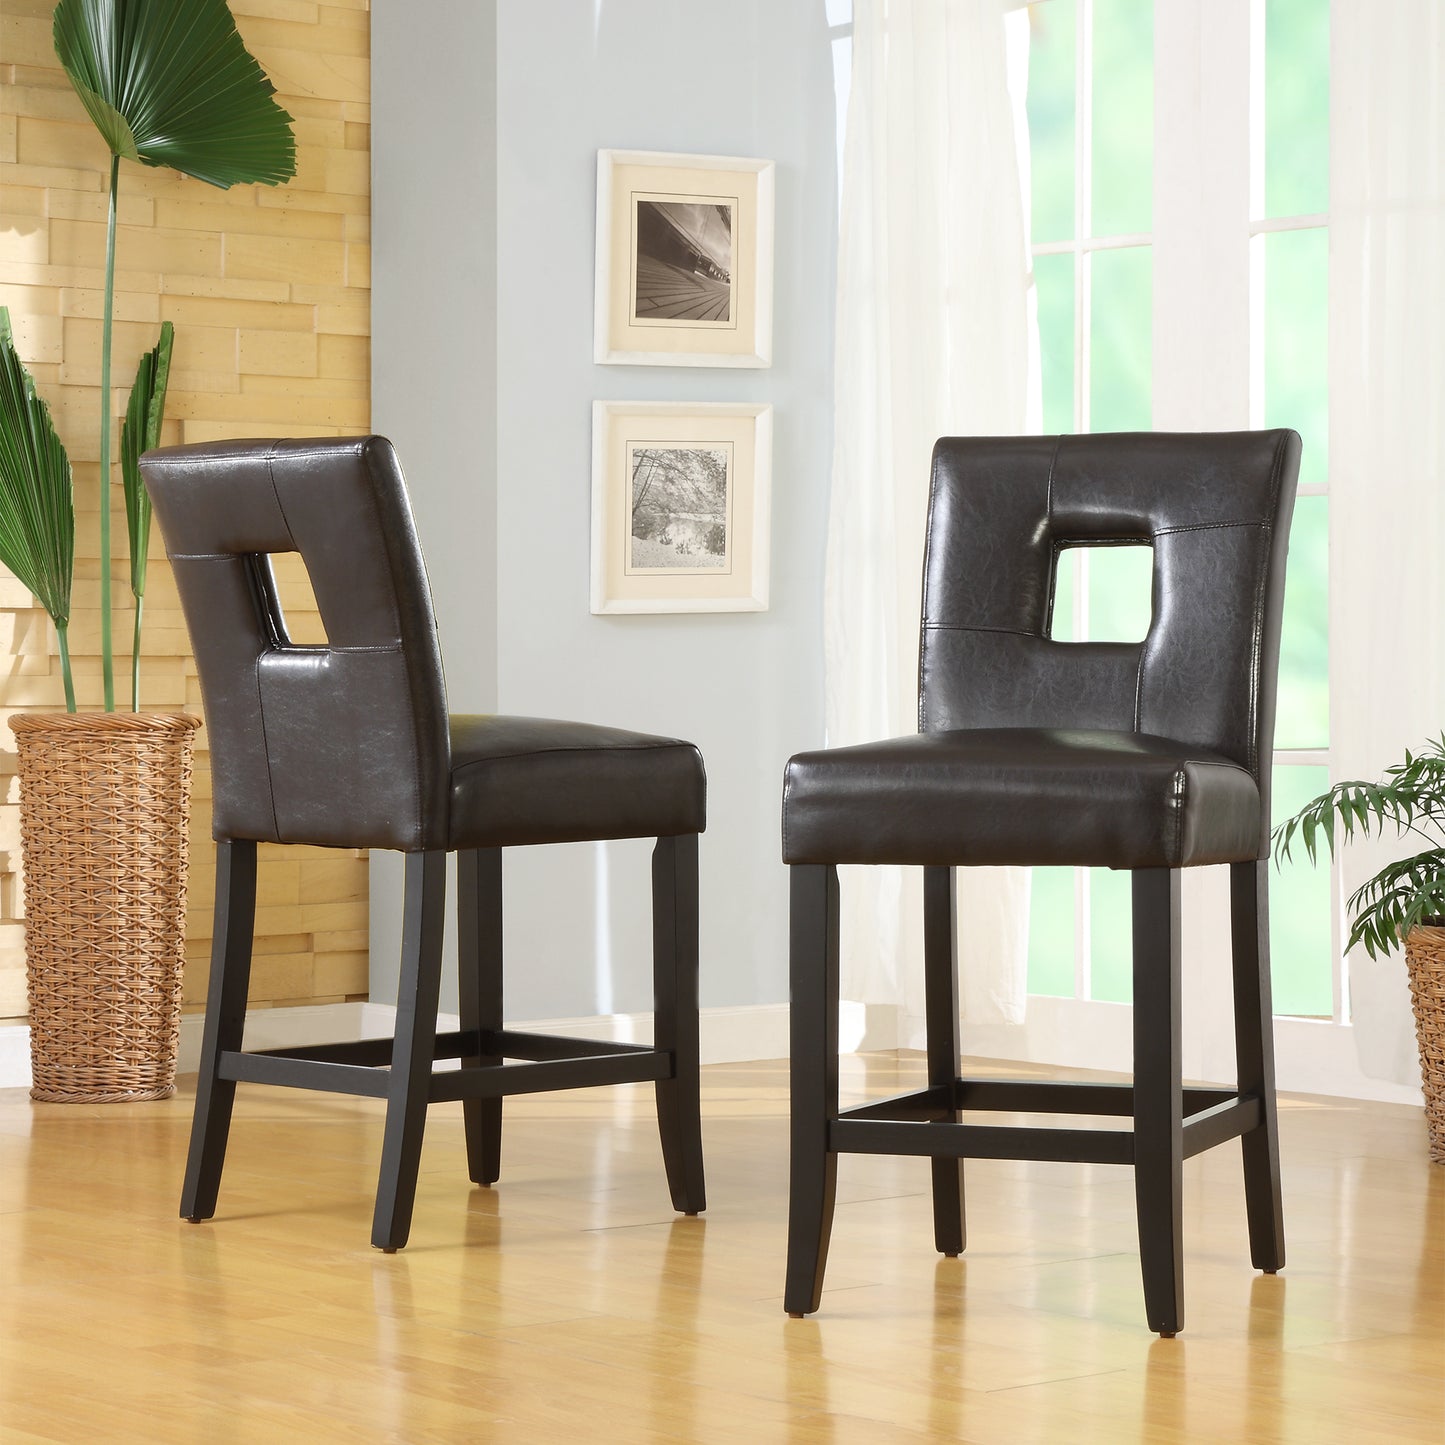 Keyhole Counter Height High Back Stools (Set of 2) - Dark Brown Faux Leather